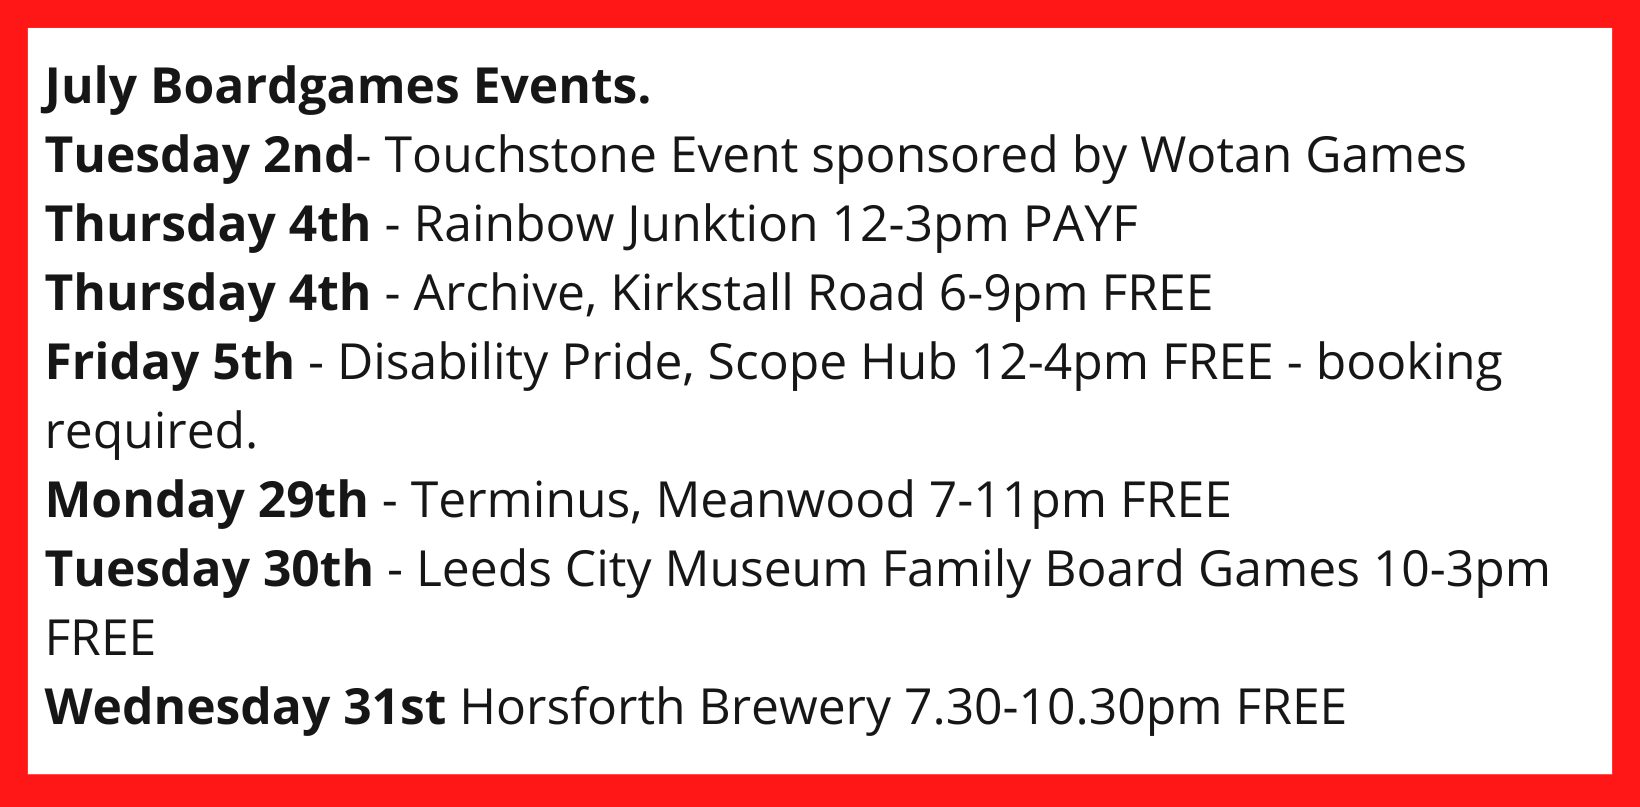 July Boardgames Events. Tuesday 2nd- Touchstone Event sponsored by Wotan Games Thursday 4th - Rainbow Junktion 12-3pm PAYF Thursday 4th - Archive, Kirkstall Road 6-9pm FREE Friday 5th - Disability Pride, Scope Hub 12-4pm FREE - booking required. Monday 29th - Terminus, Meanwood 7-11pm FREE Tuesday 30th - Leeds City Museum Family Board Games 10-3pm FREE Wednesday 31st Horsforth Brewery 7.30-10.30pm FREE